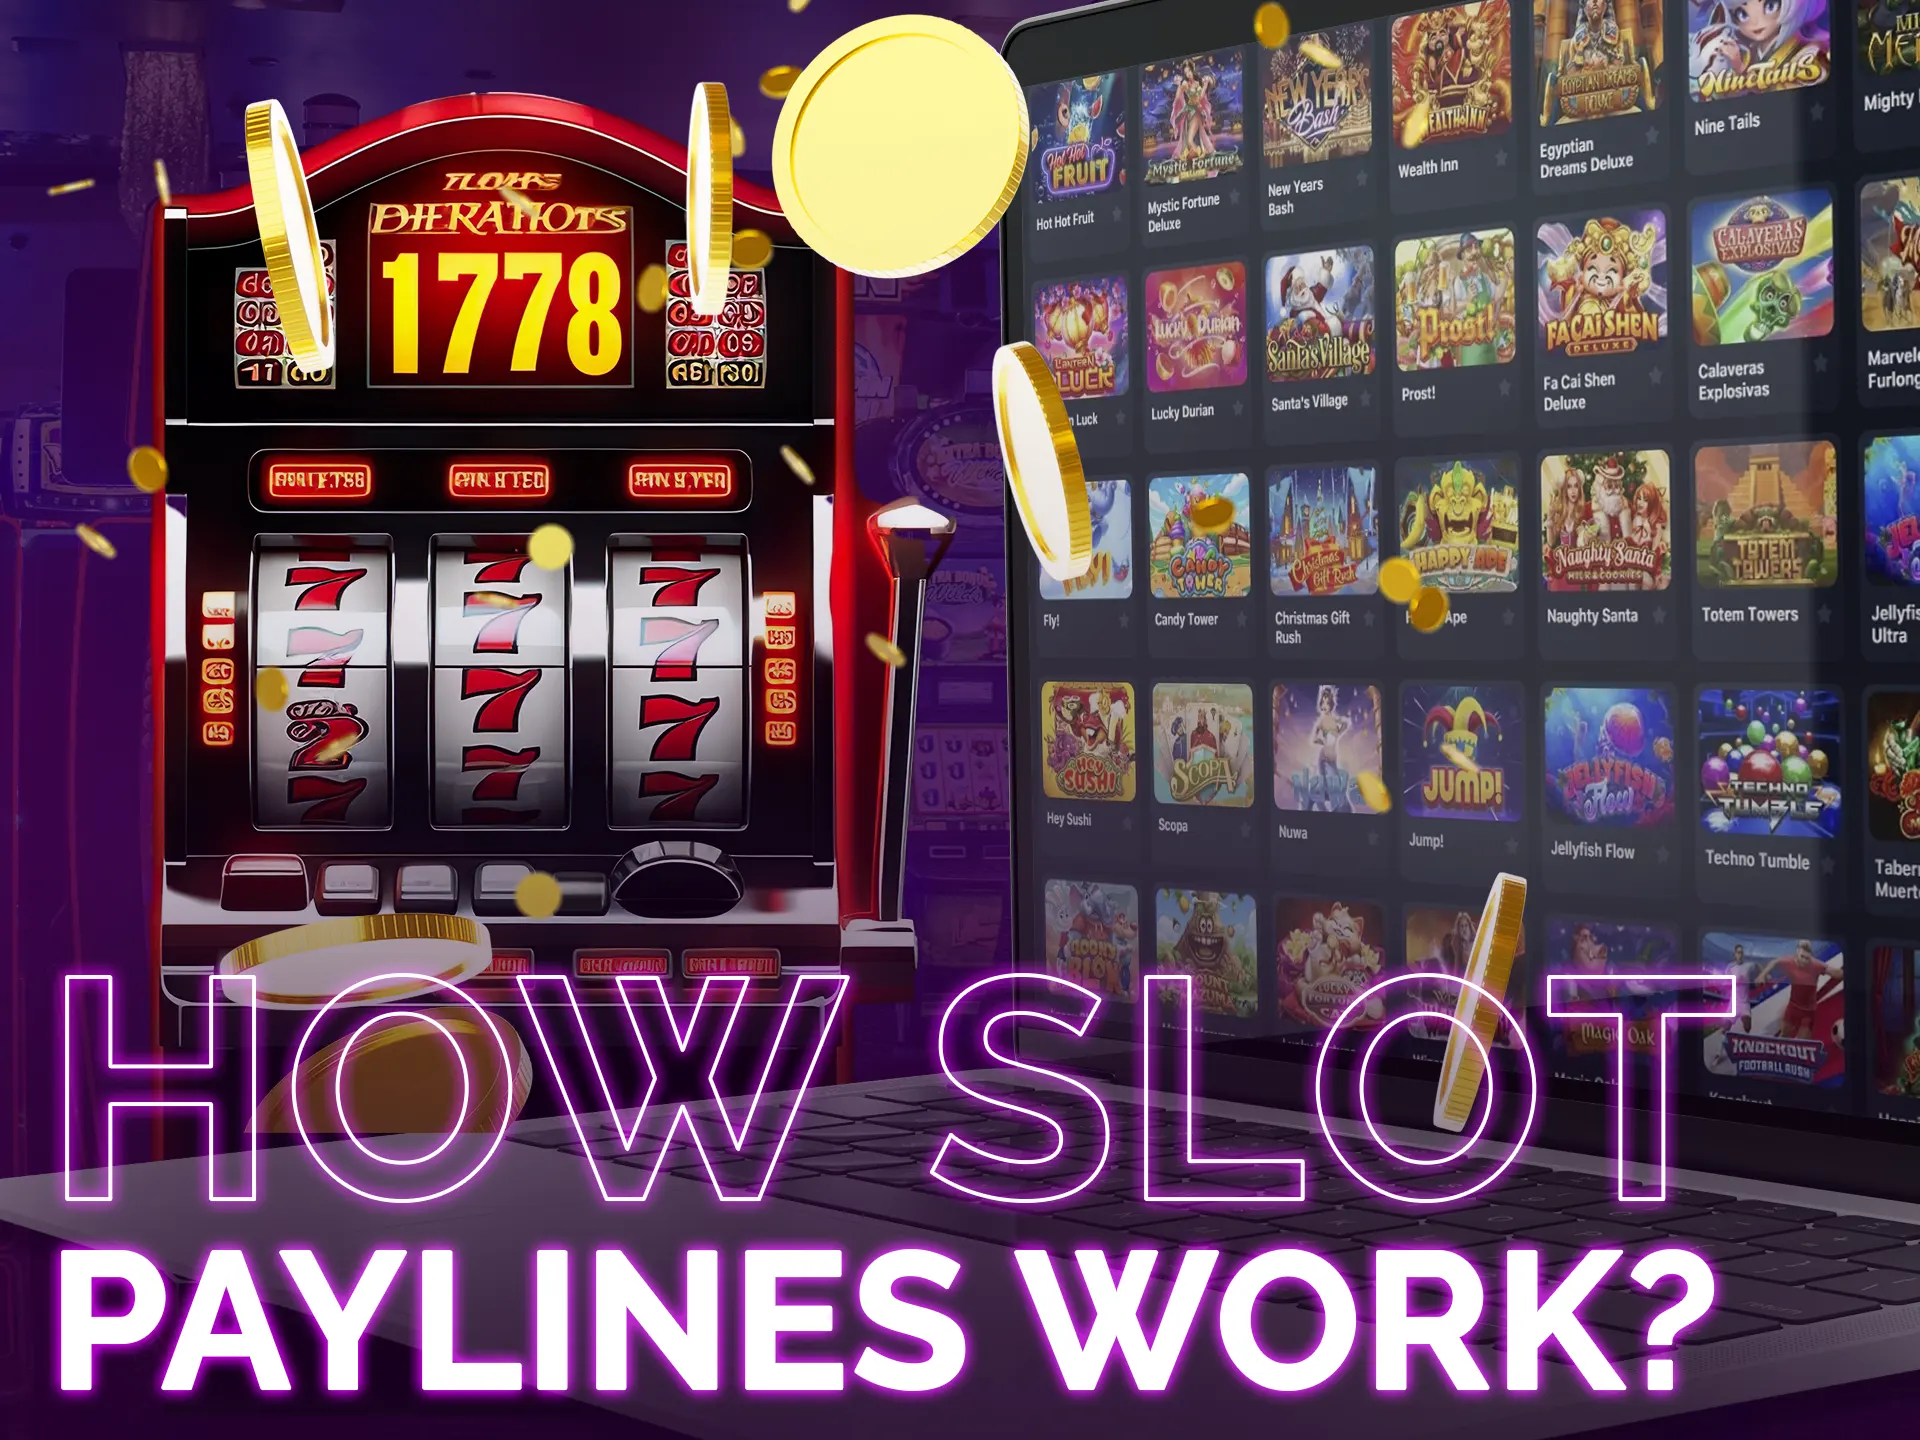 Slot paylines involve forming sequences of identical symbols on reels for varying payouts.